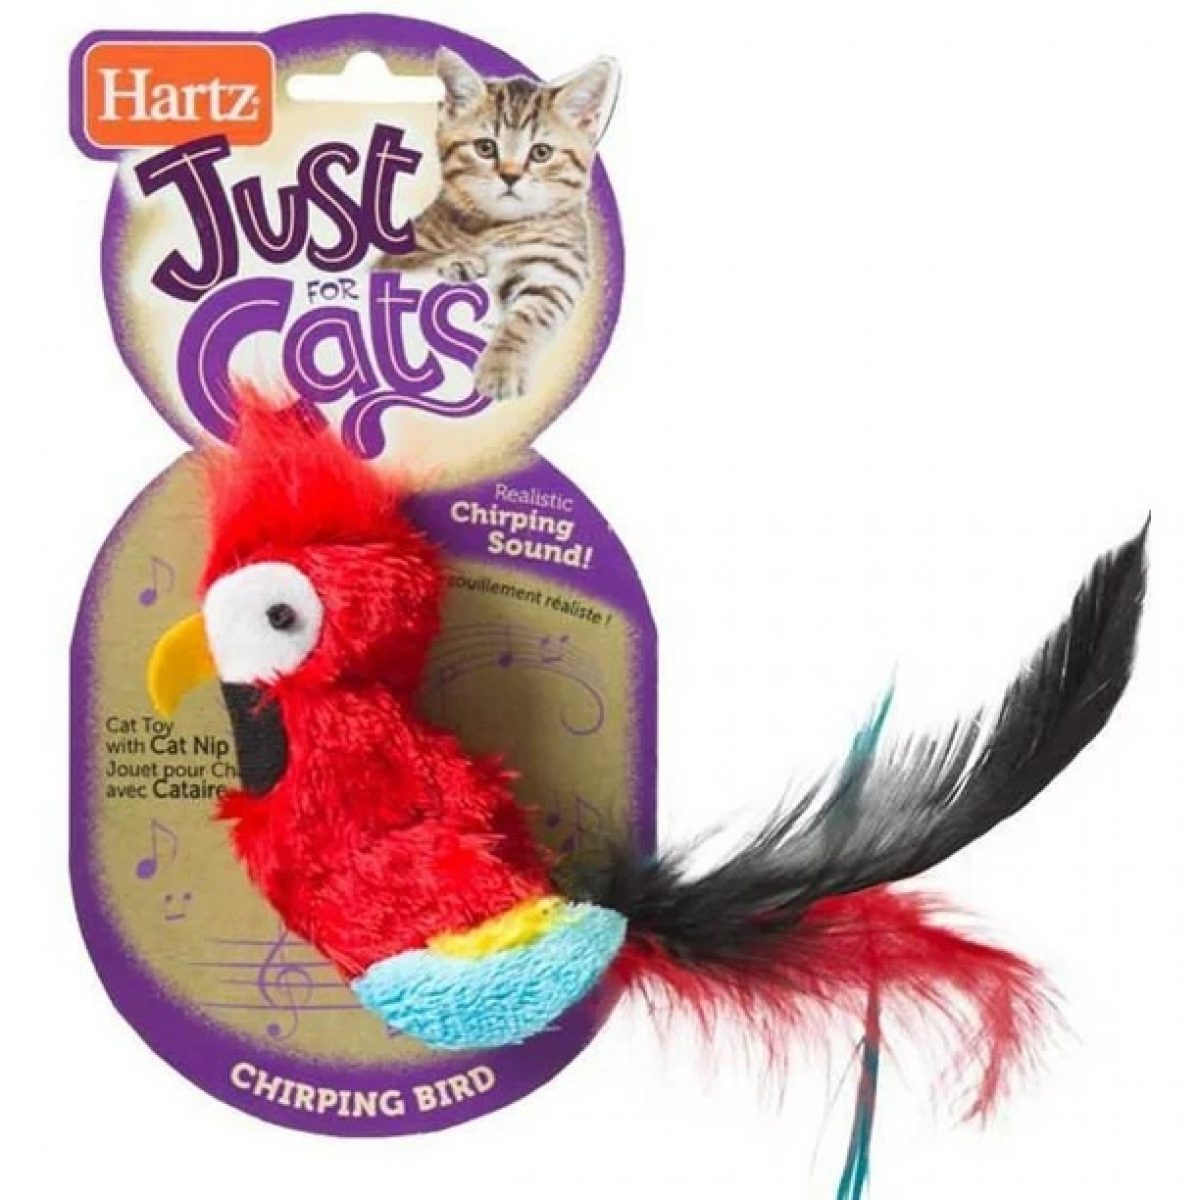 Hartz Just for Cats Chirping Bird Cat Toy